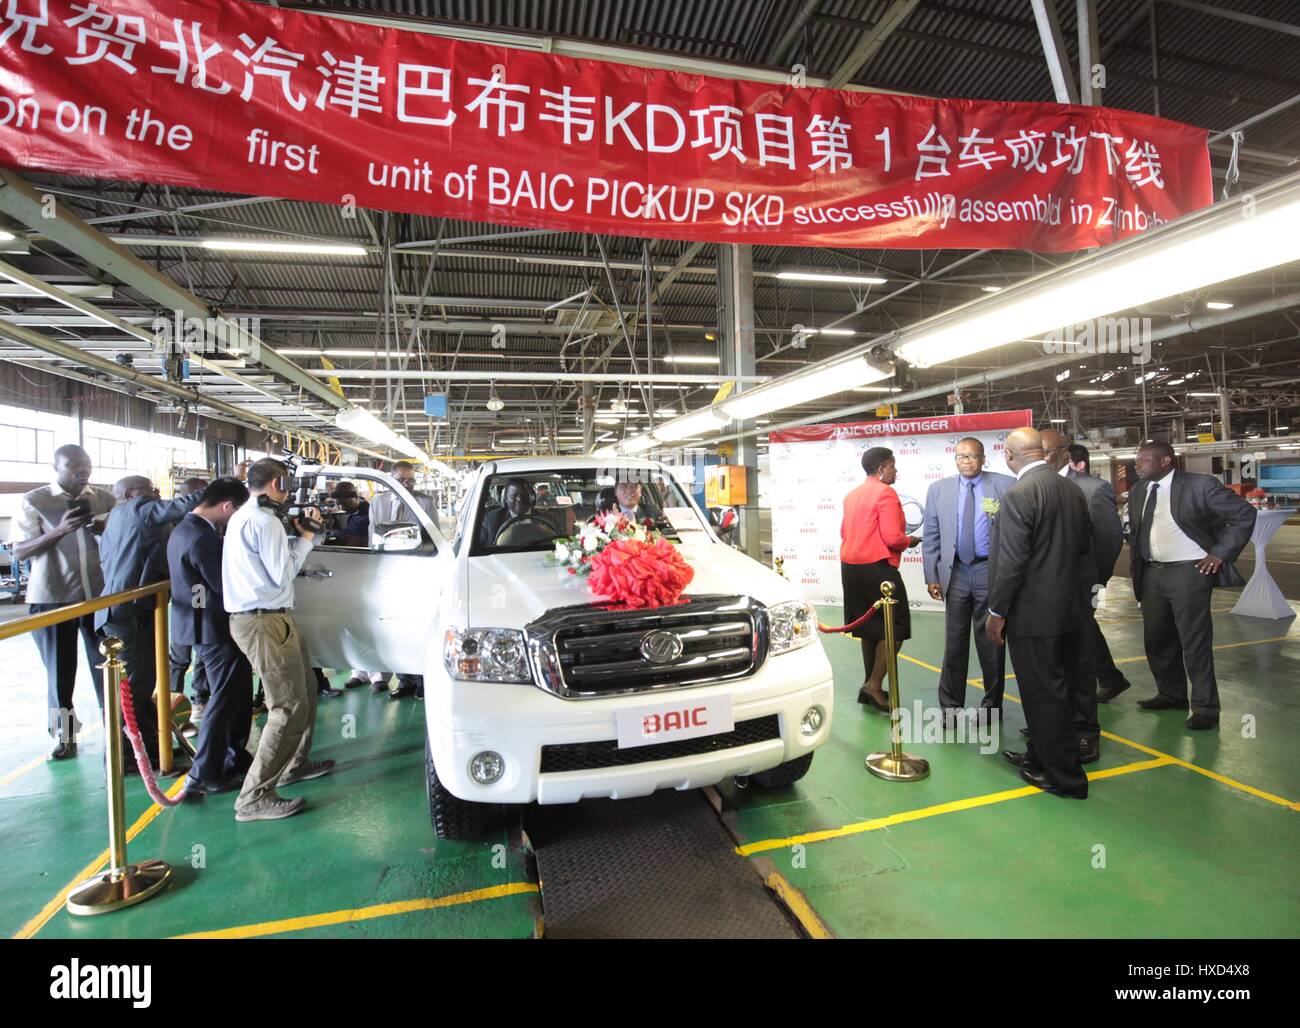 Harare, Zimbabwe. 27th Mar, 2017. A brand-new Grand Tiger pick-up truck leaves the assembly line at the Willowvale Mazda Motor Industries plant in Harare, Zimbabwe, on March 27, 2017. A joint venture of Chinese and Zimbabwean auto companies on Monday launched a top-of-the-range pickup truck, the Grand Tiger, in Zimbabwe. The launch followed the joint venture forged between Beijing Automotive Group Co. Ltd (BAIC Group) and two Zimbabwean companies to form Beiqi Zimbabwe (Pvt) Ltd. Credit: Stringer/Xinhua/Alamy Live News Stock Photo